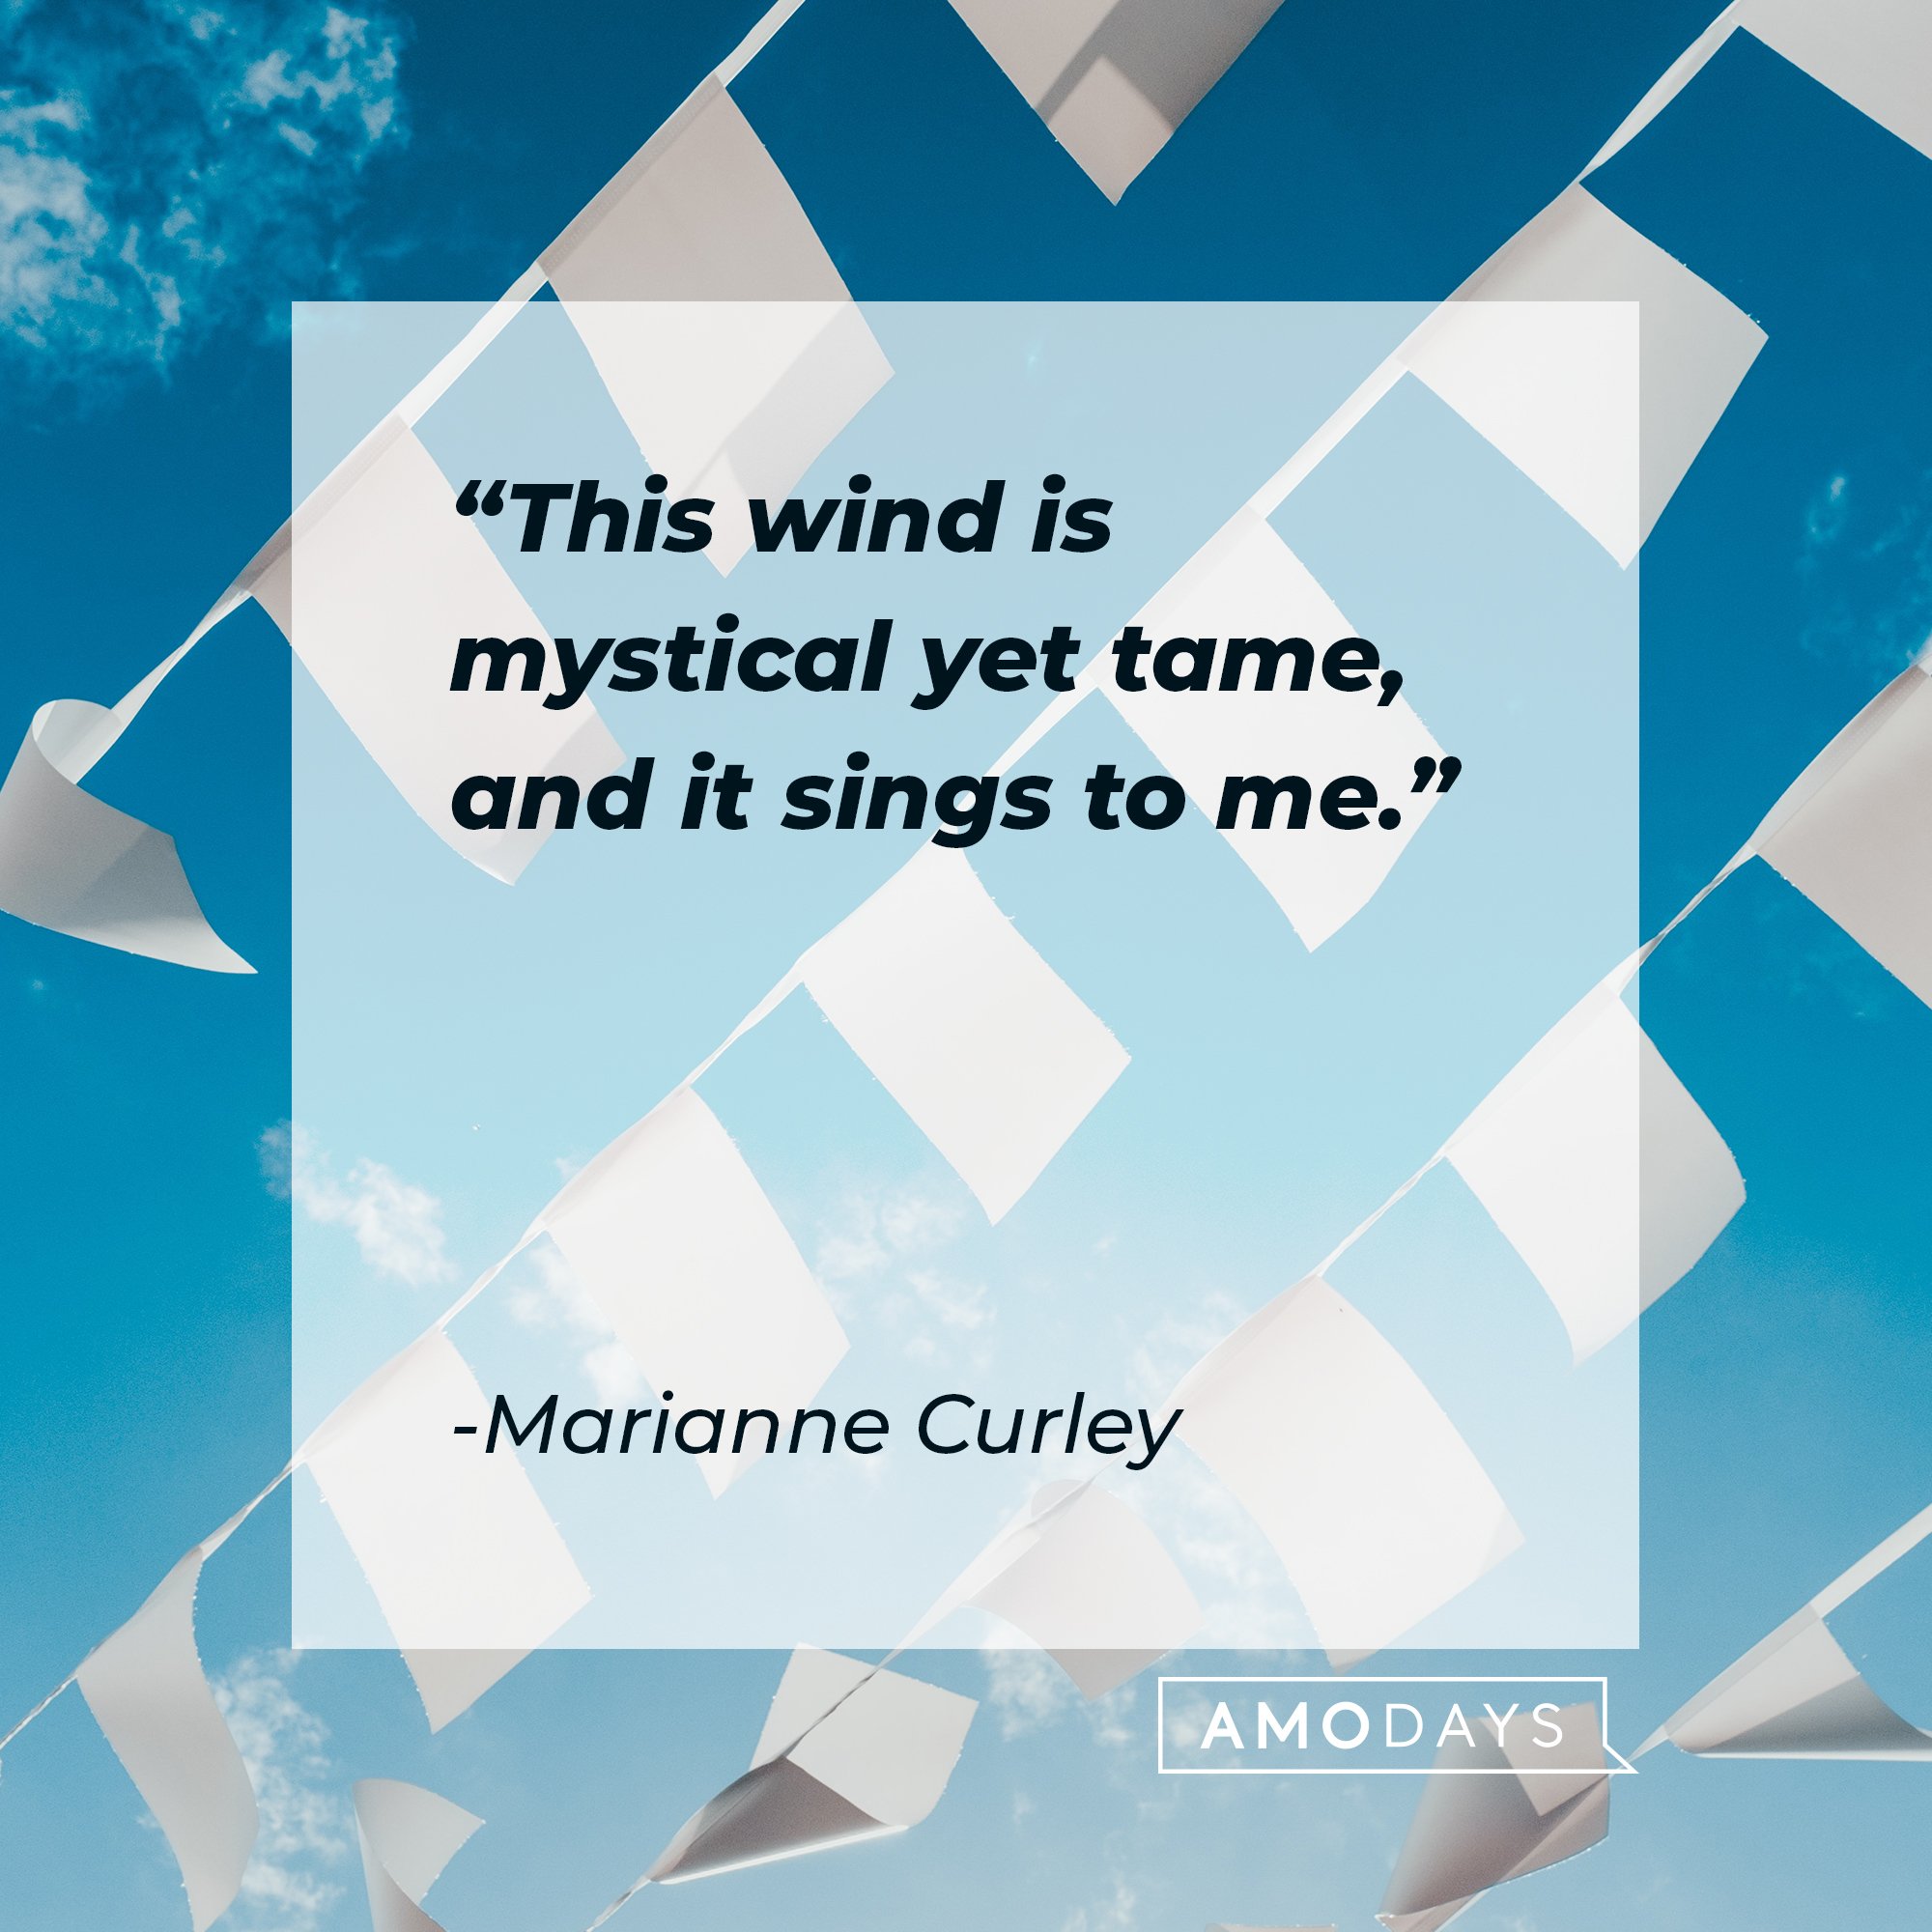 Marianne Curley's quote: "This wind is mystical yet tame, and it sings to me." | Image: AmoDays